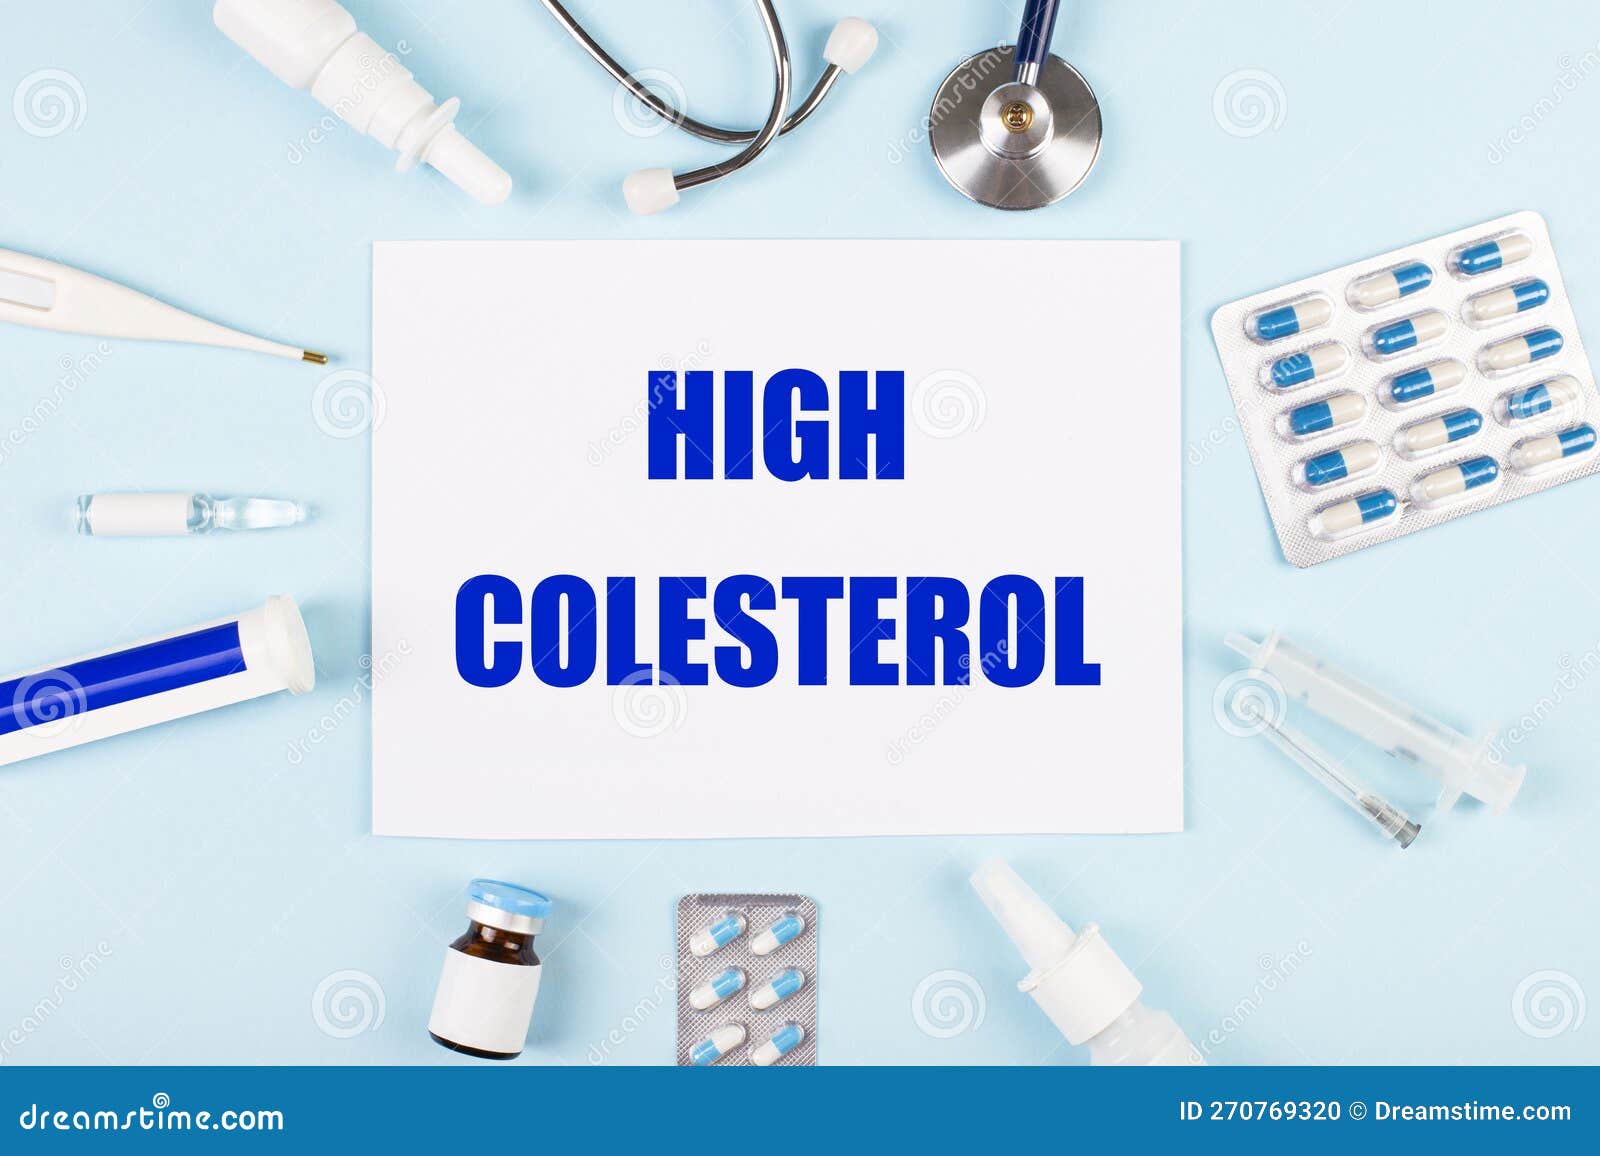 on a blue background, a stethoscope, a thermometer, pills, medicine bottles and a piece of paper with the text high colesterol